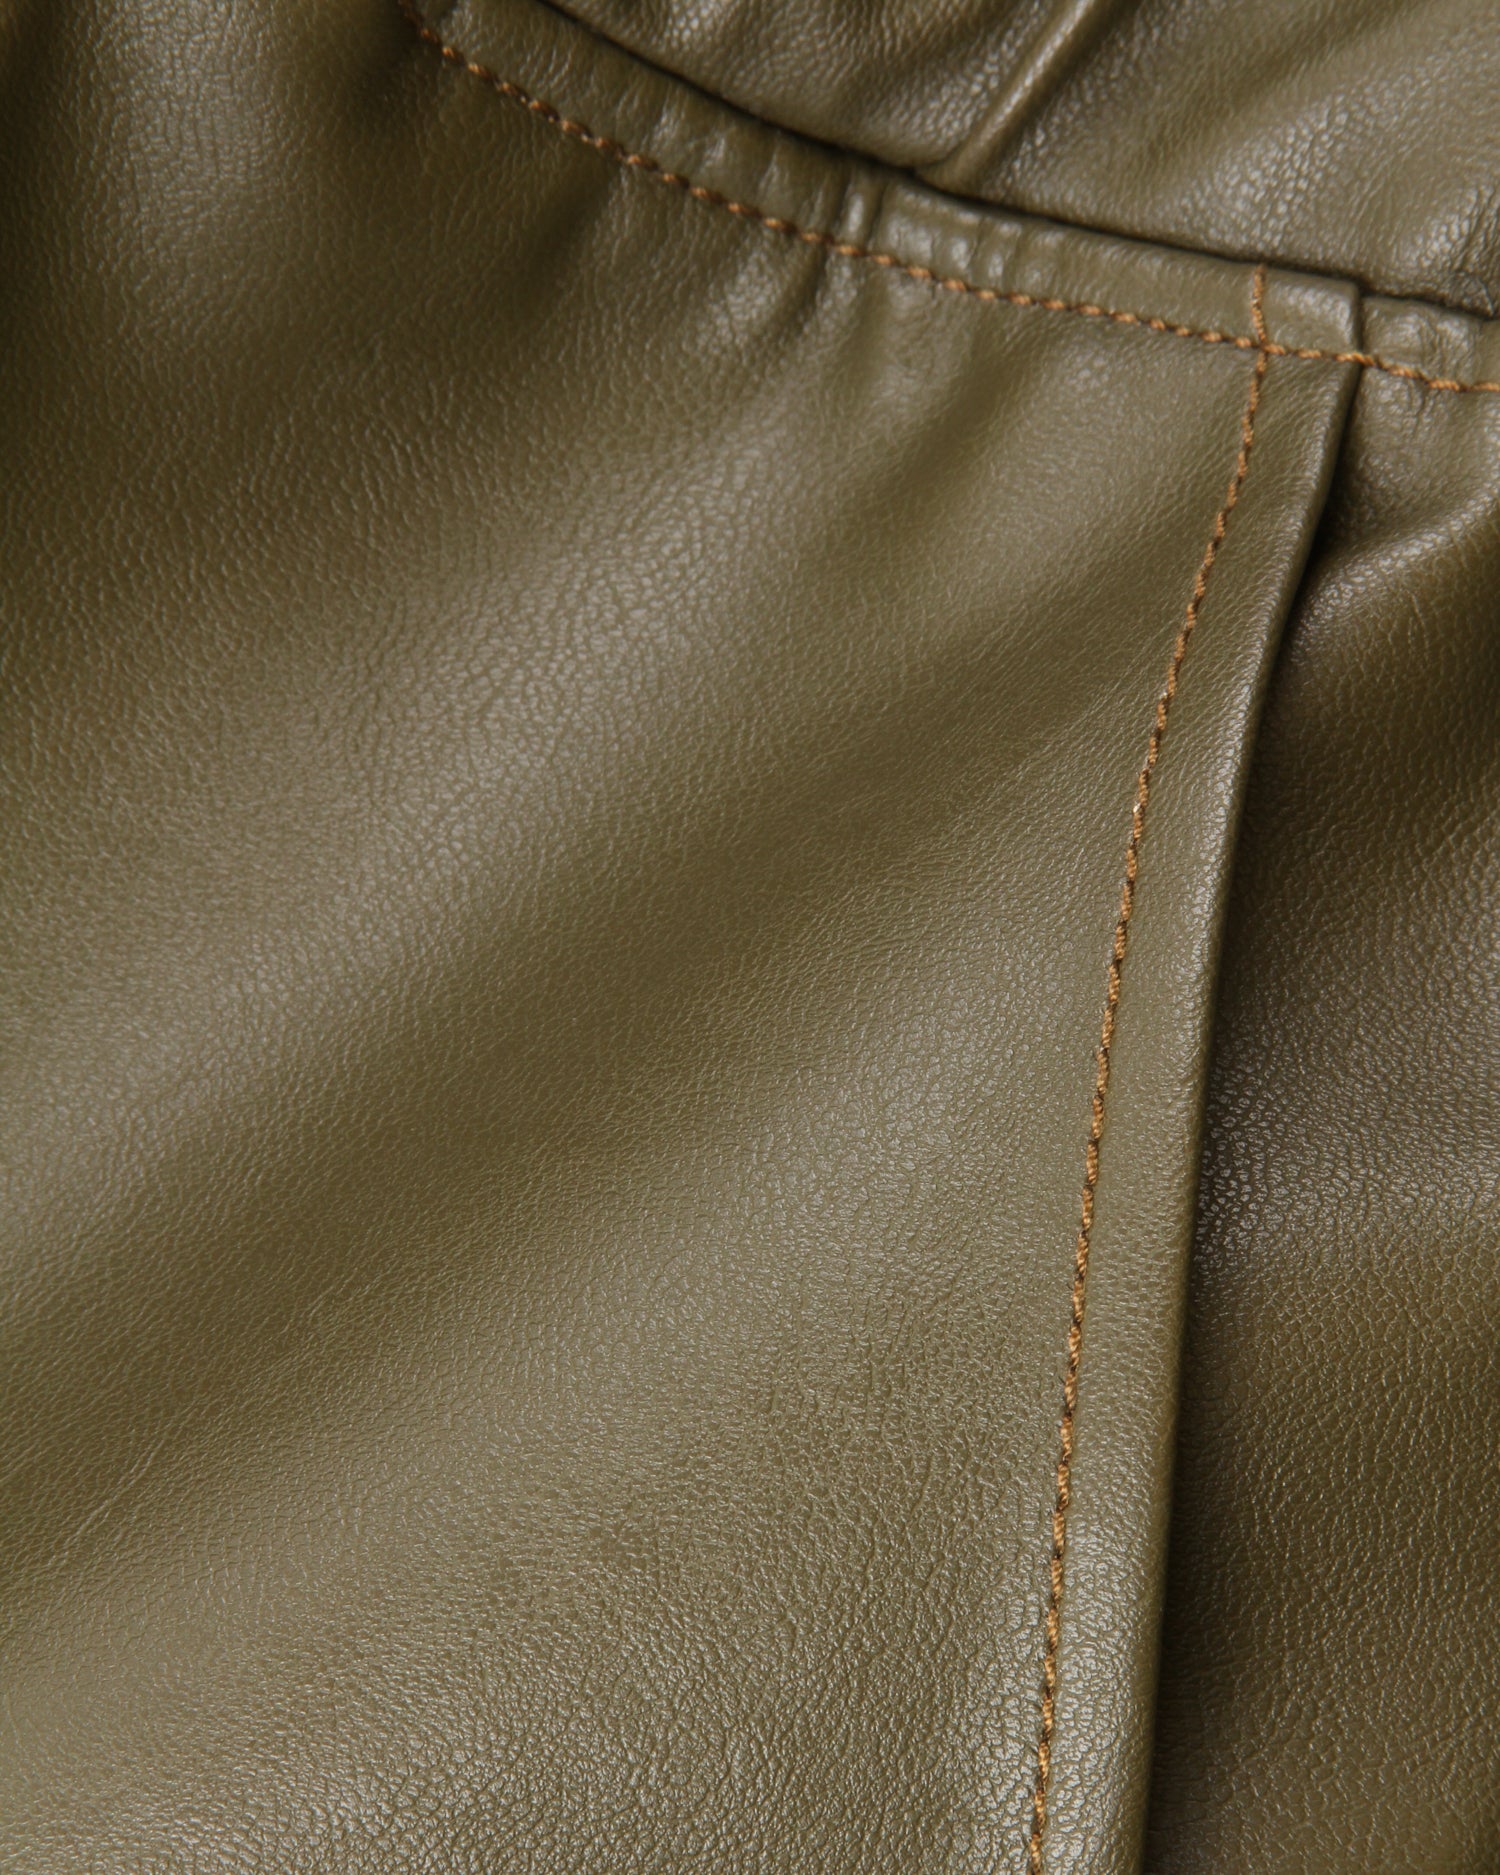 Noemi Trousers Faux Leather Green